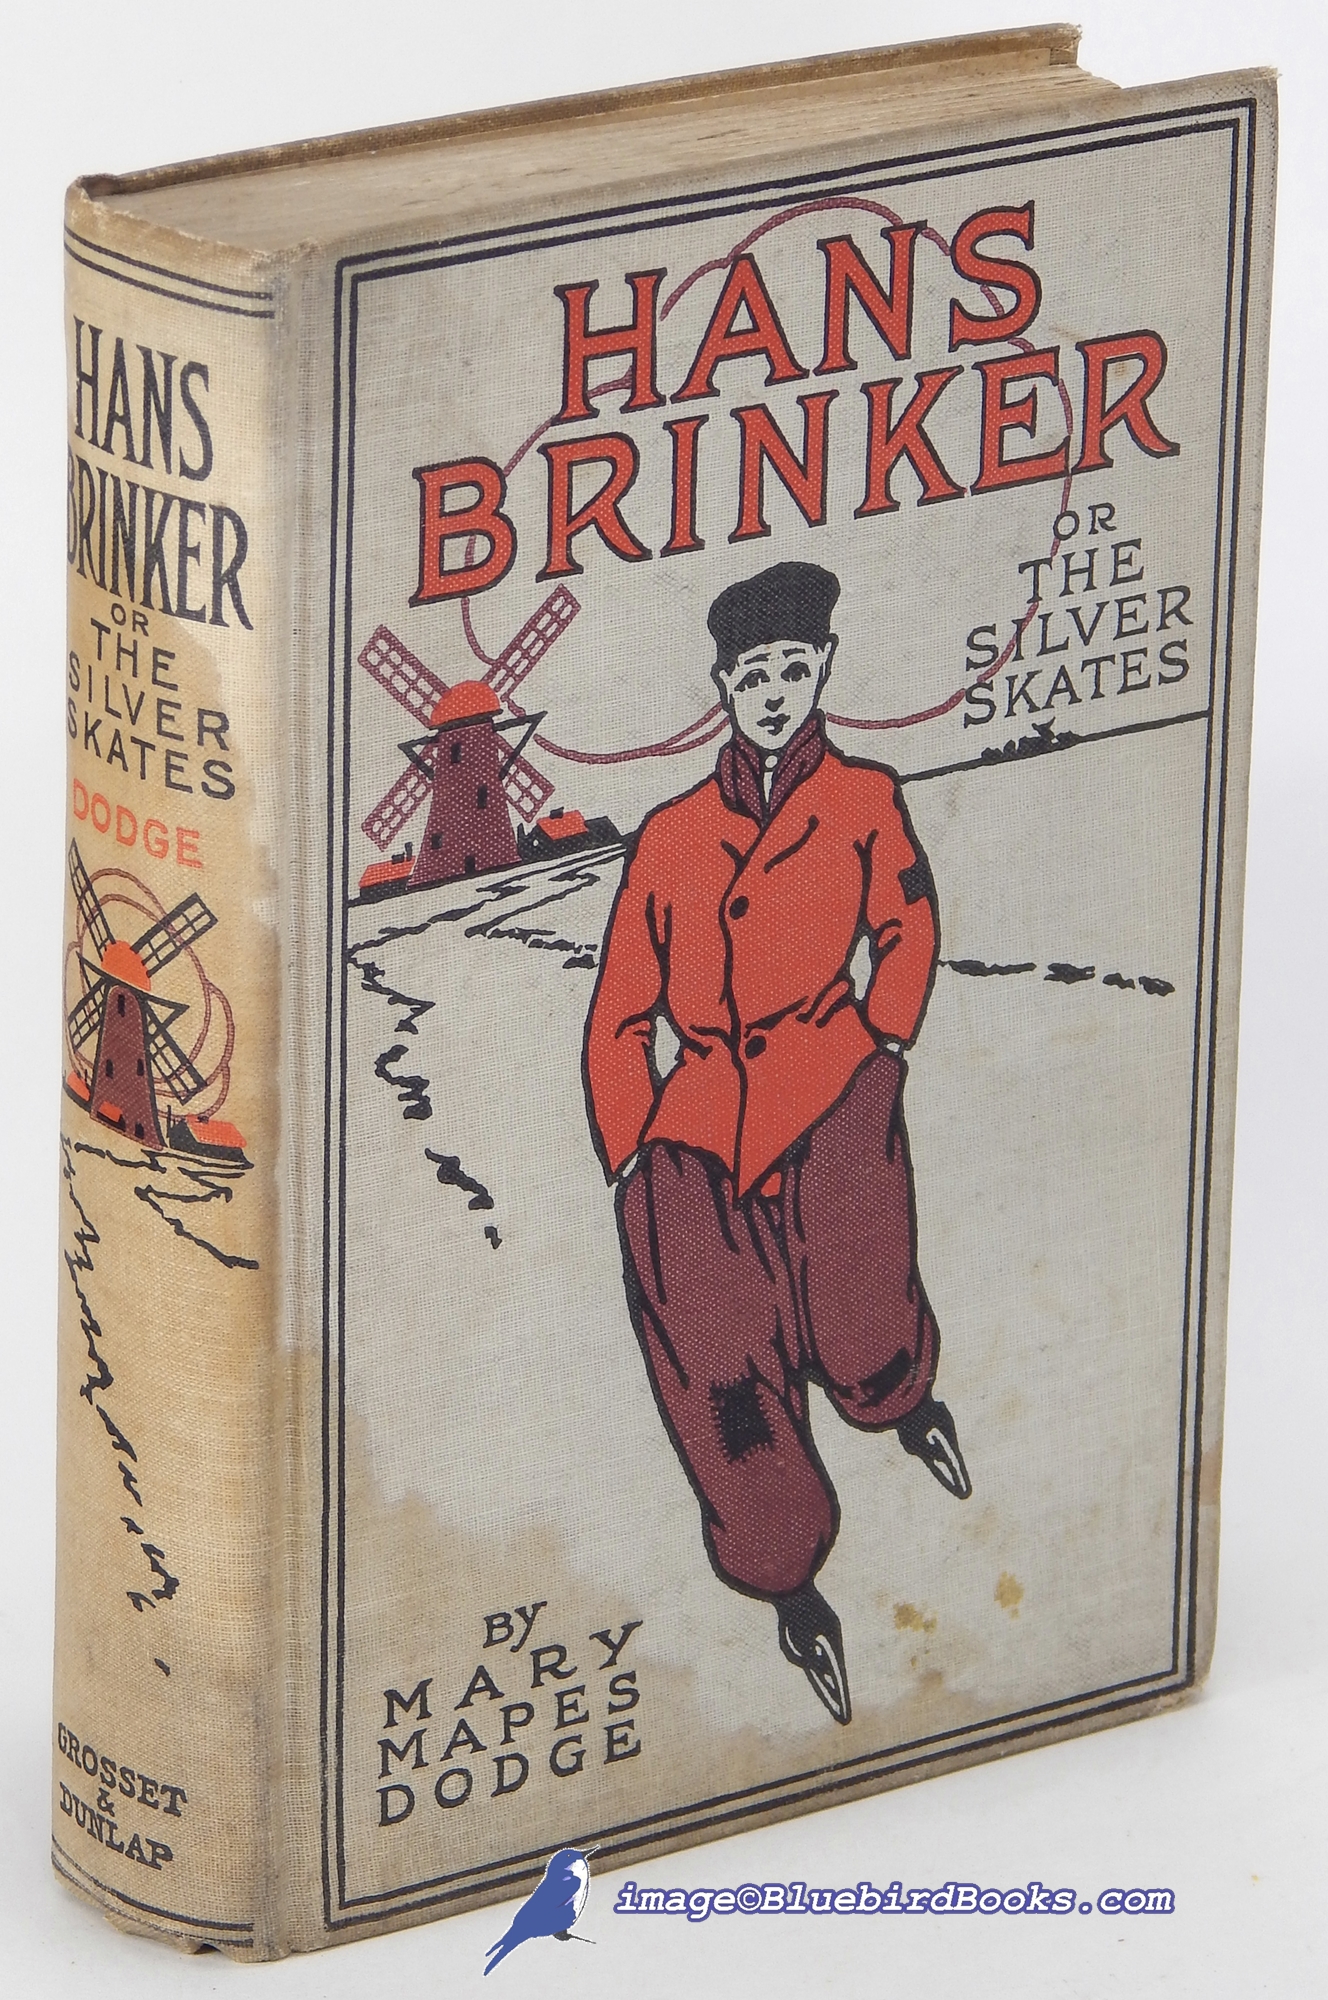 DODGE, MARY MAPES - Hans Brinker, or the Silver Skates: A Story of Life in Holland